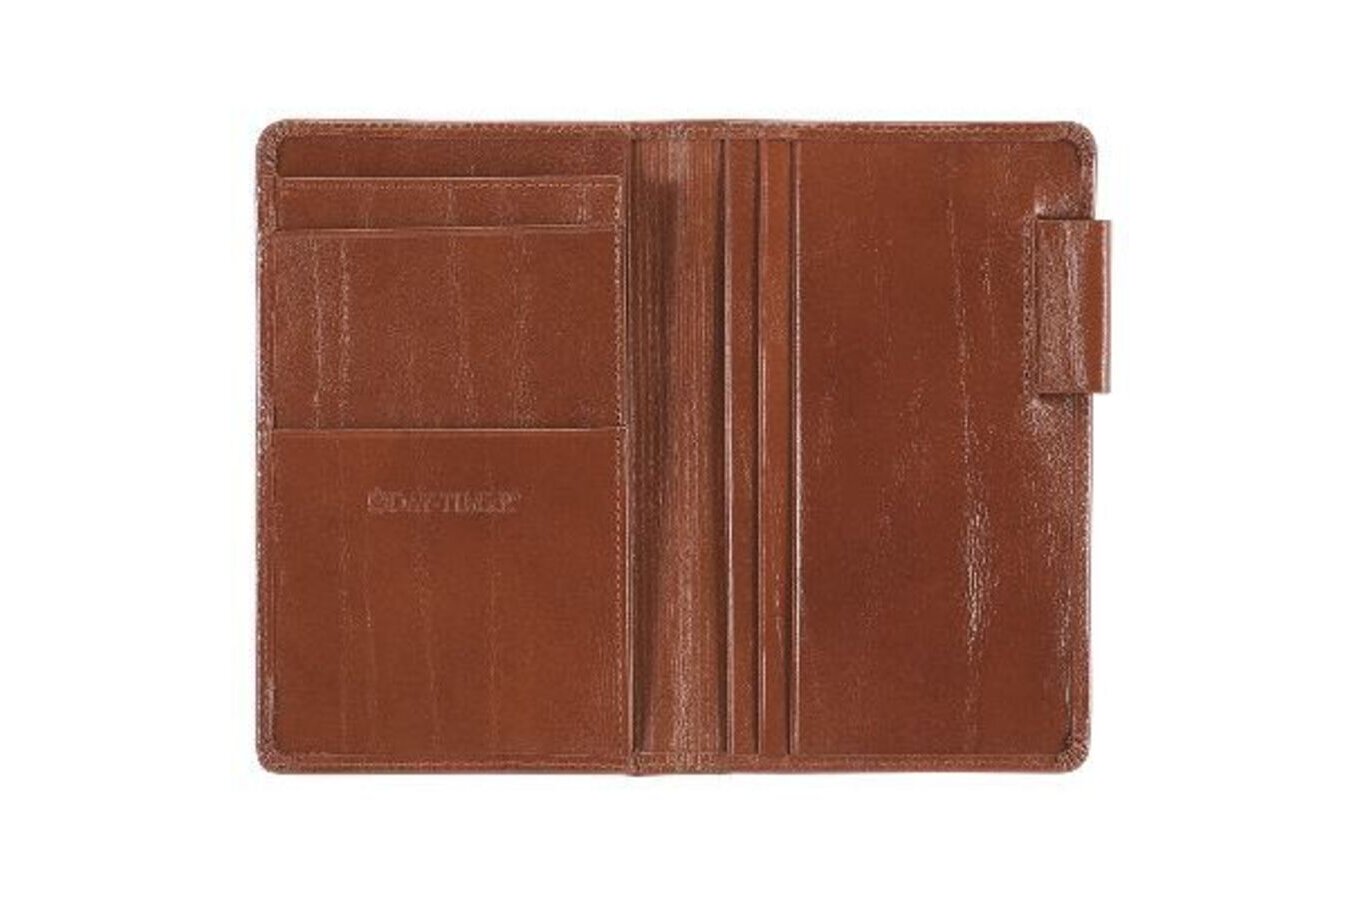 Day-Timer Armorhide Leather Zippered Planner Cover, Pocket Size, 3 1/2 x 6  1/2, Leather Planner Organizer Covers